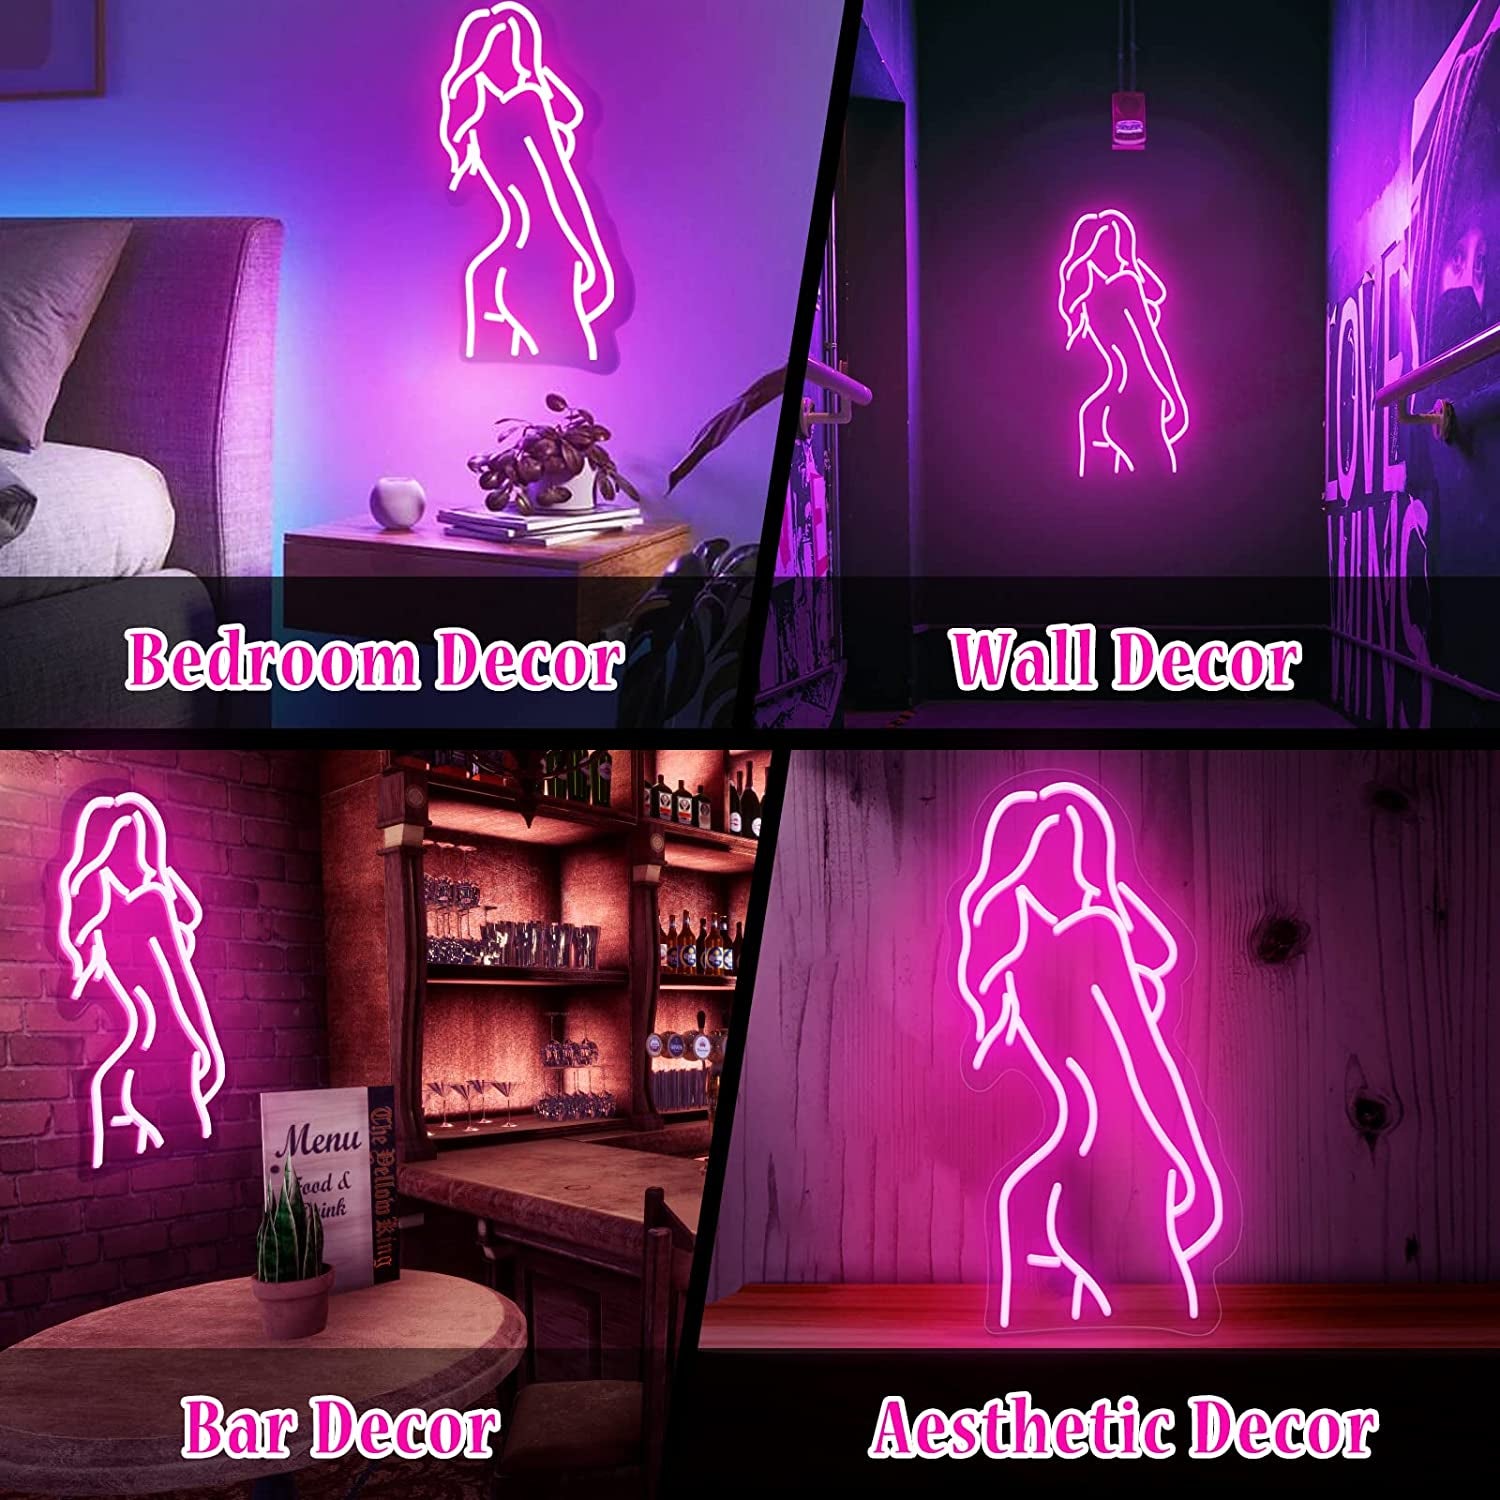 Lady Back Neon Sign, Girls Neon Sign for Wall Decor, Pink Led Sign for Bedroom,Bar Signs,Usb Connected Decorative Sign Suitable for Living Room Man Cave Party Wall Art Decoration( Hot Girl)